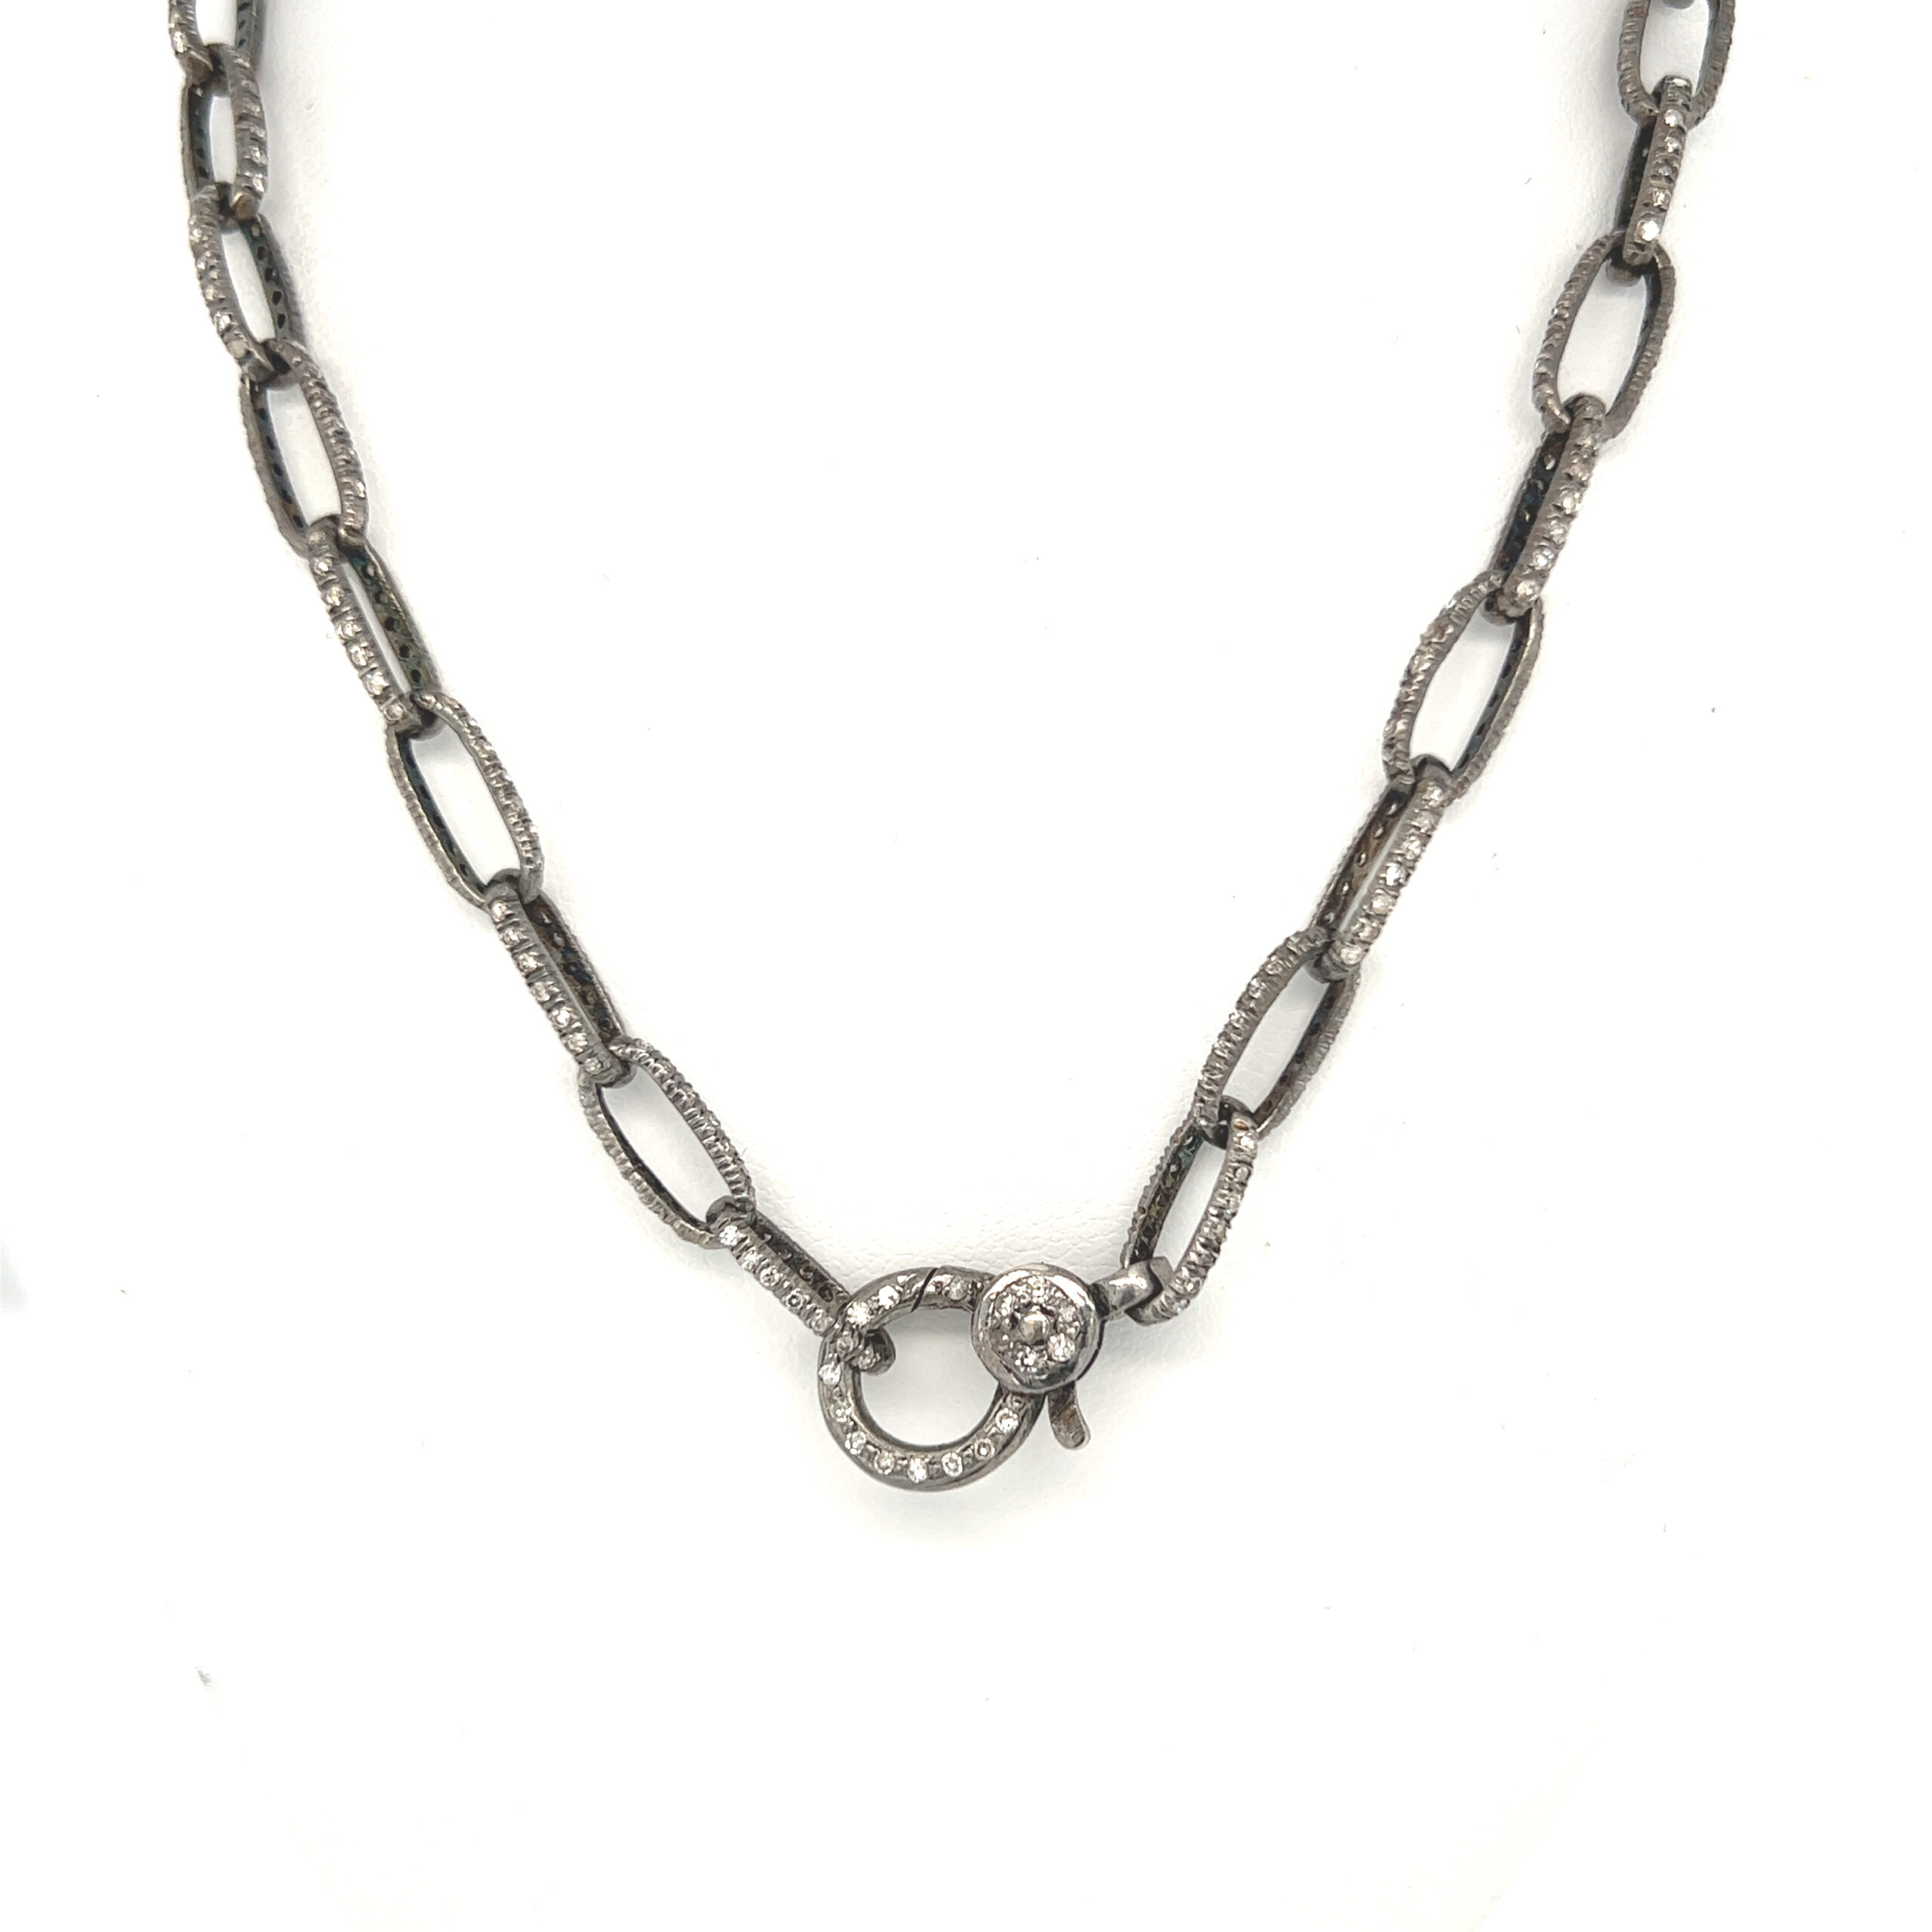 Featured image for “Amazing Pavé Diamond Chain”